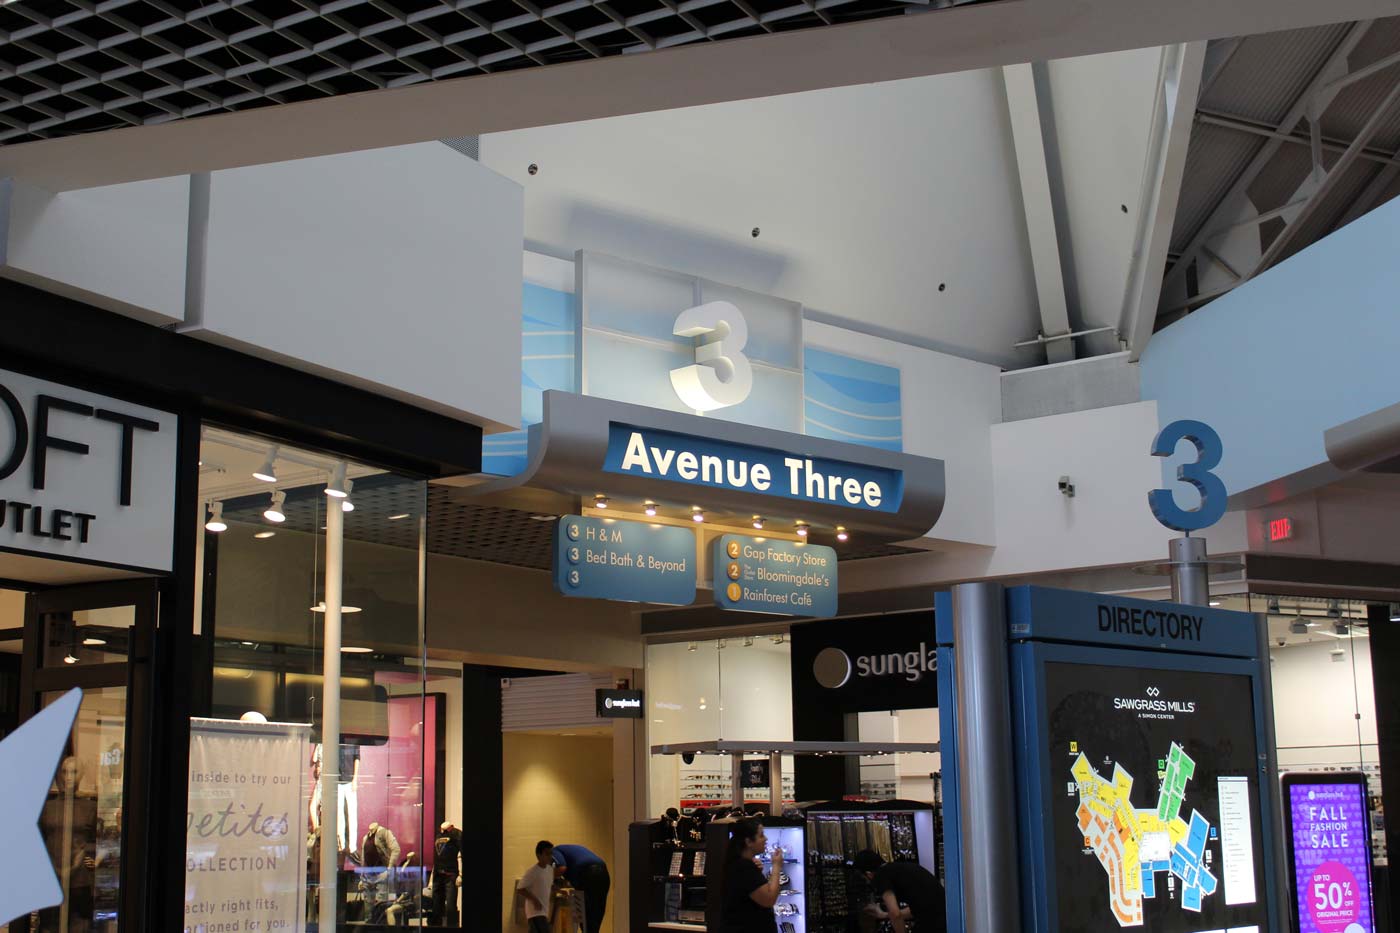 Sawgrass Mills - Shop at Over 350 Stores near Fort Lauderdale, FL